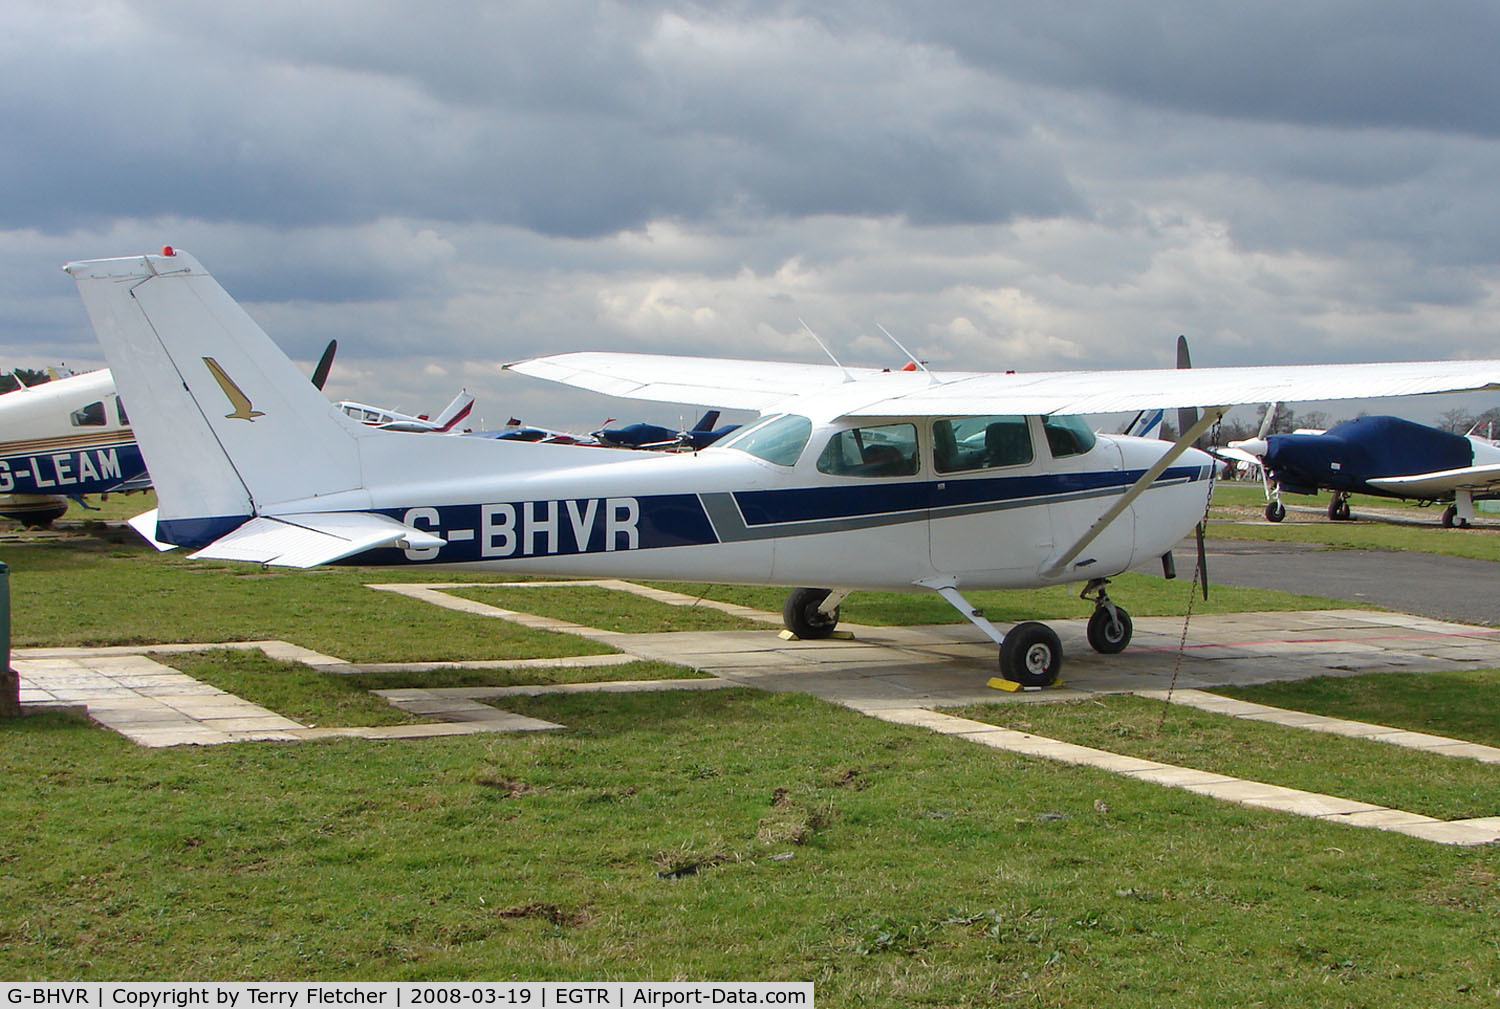 G-BHVR, 1978 Cessna 172N Skyhawk C/N 172-70196, Part of the busy GA scene at Elstree Airfield in the northern suburbs of London